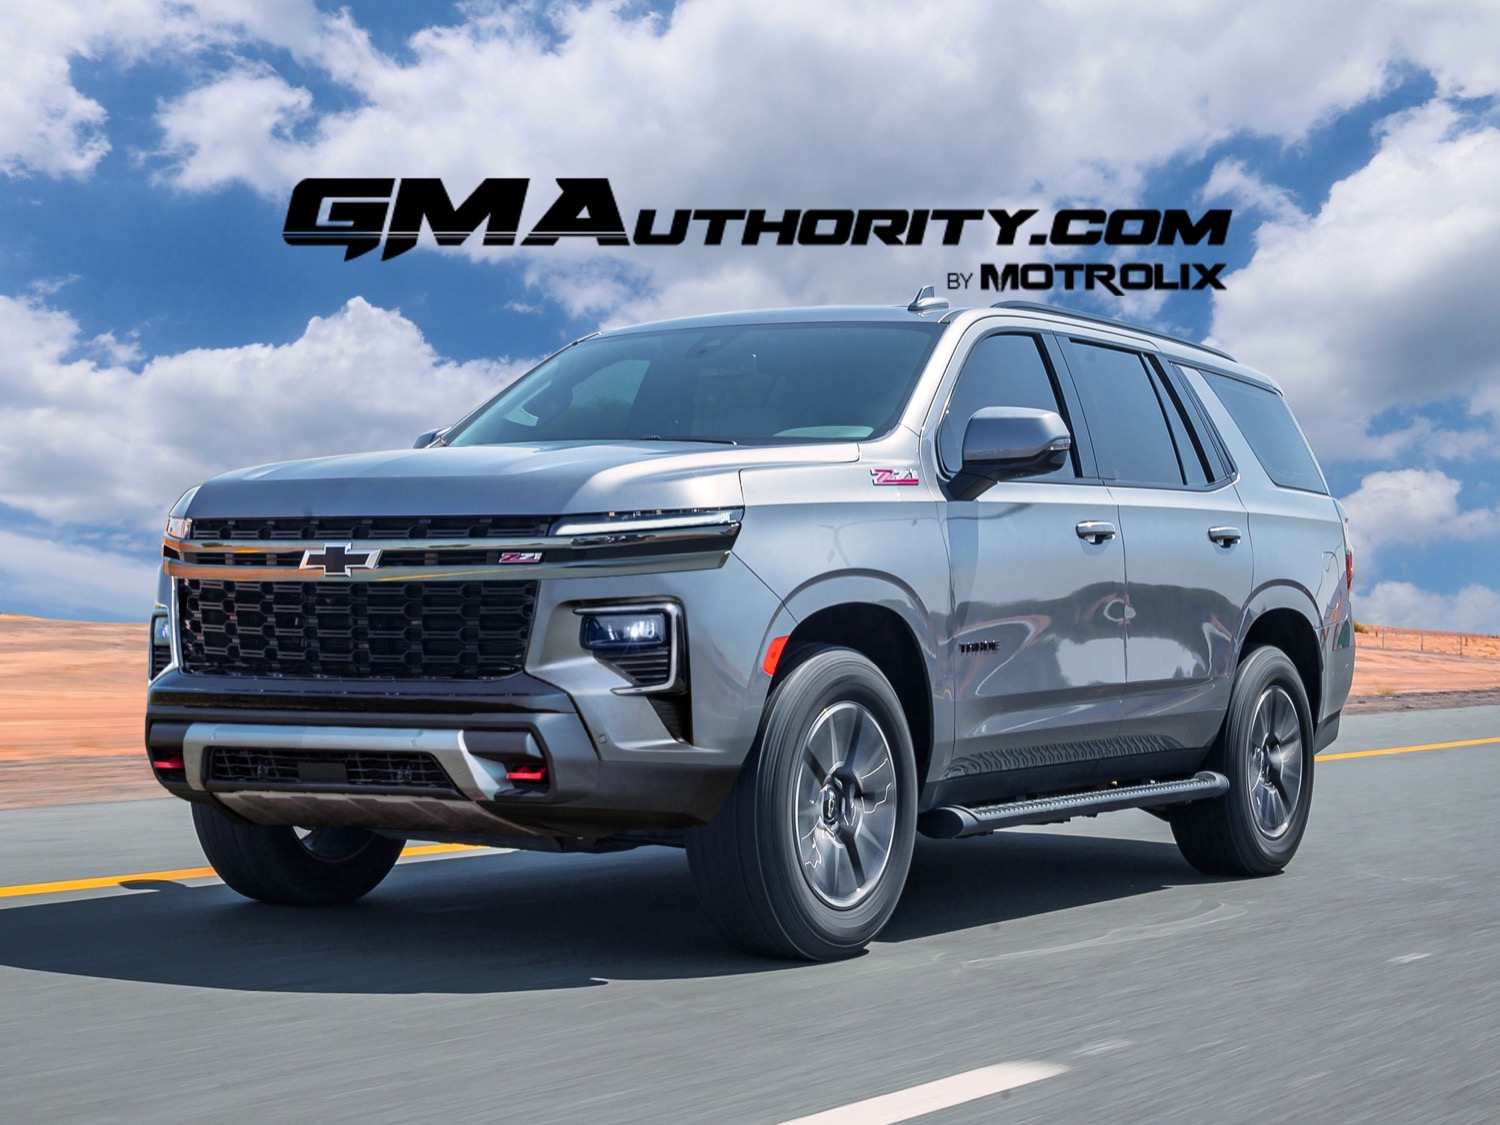 GM Authority - GM Authority updated their cover photo.